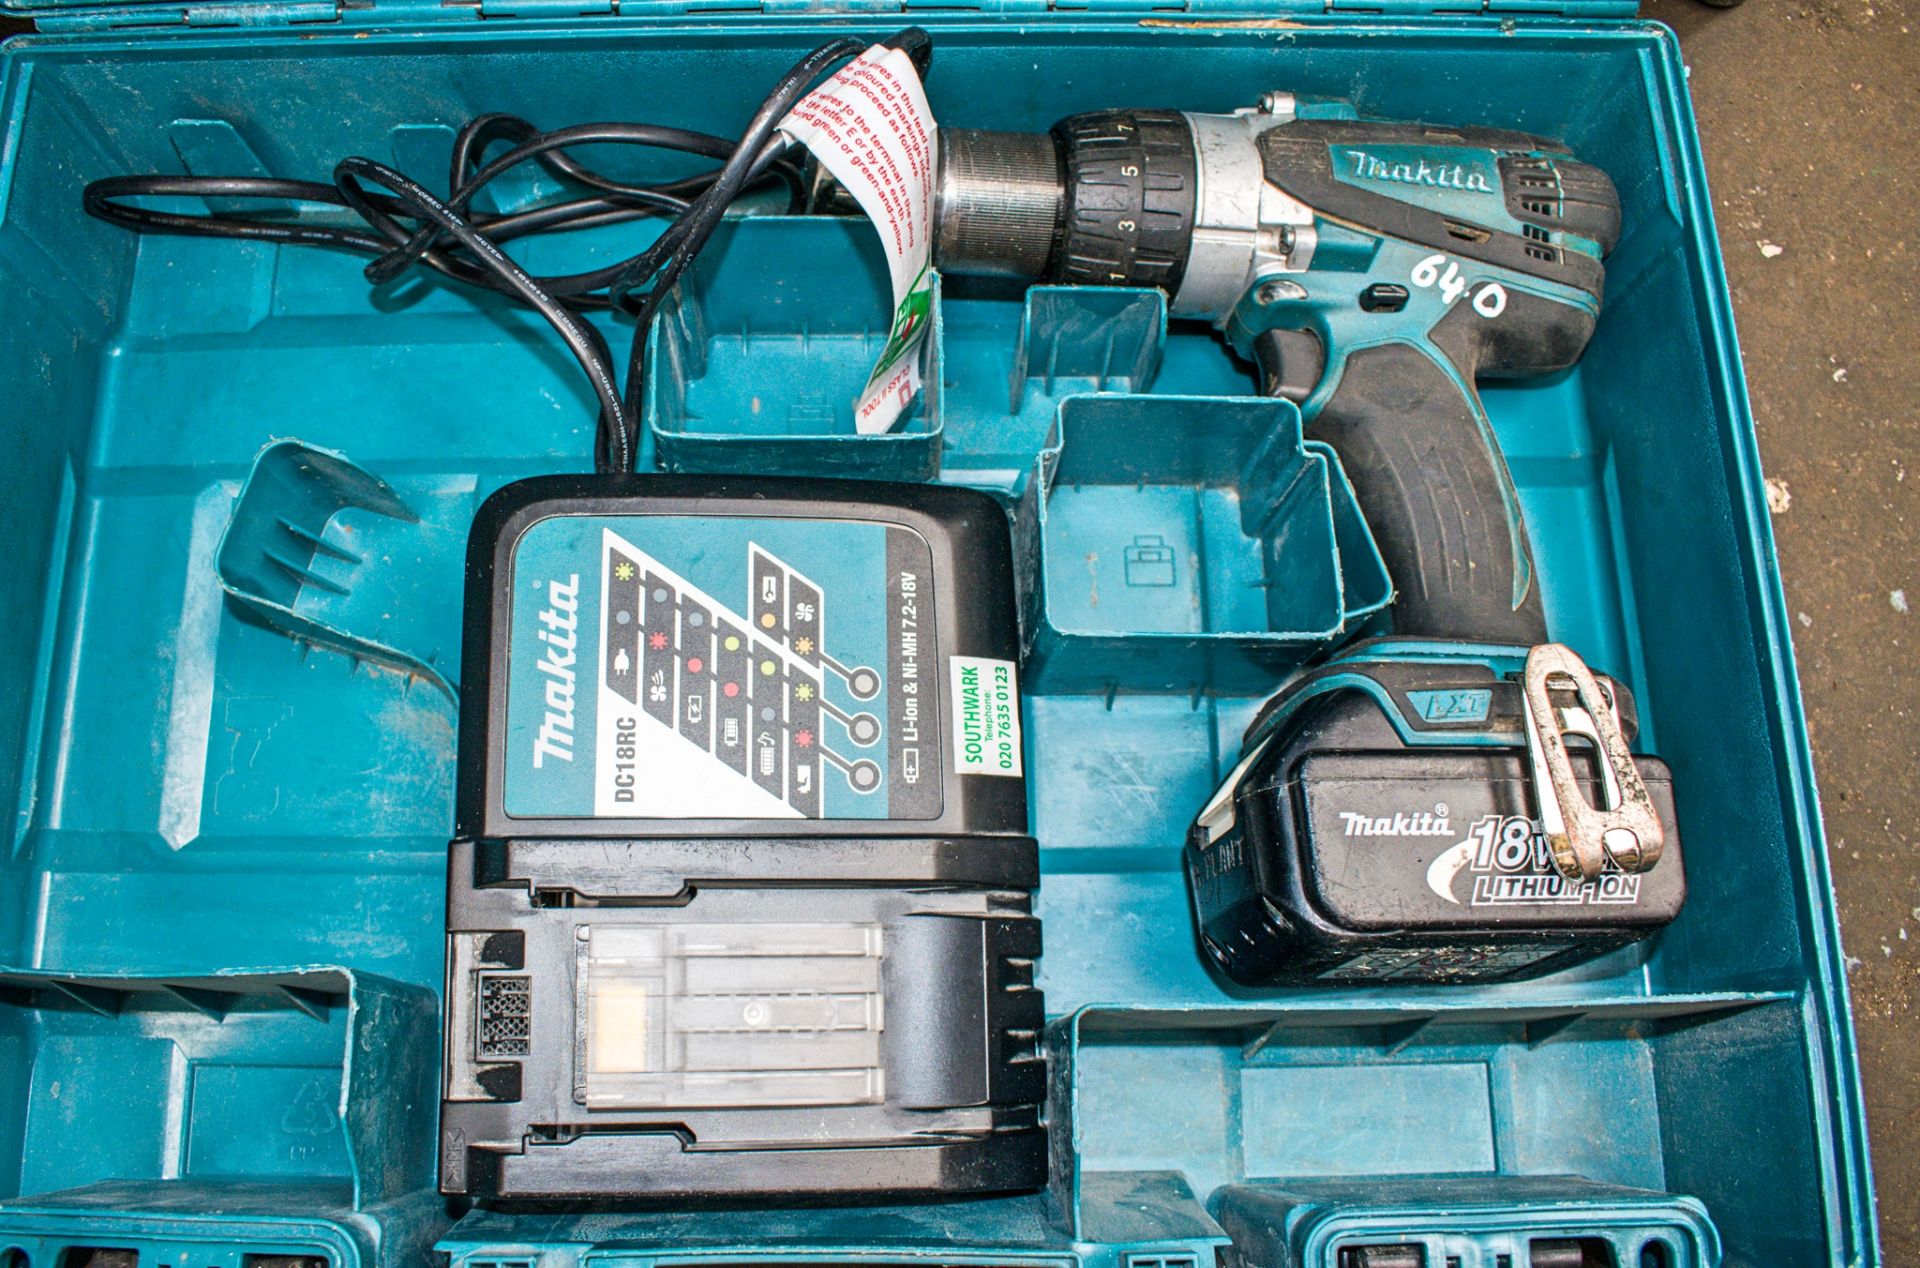 Makita 18v cordless drill c/w battery, charger & carry case A617492